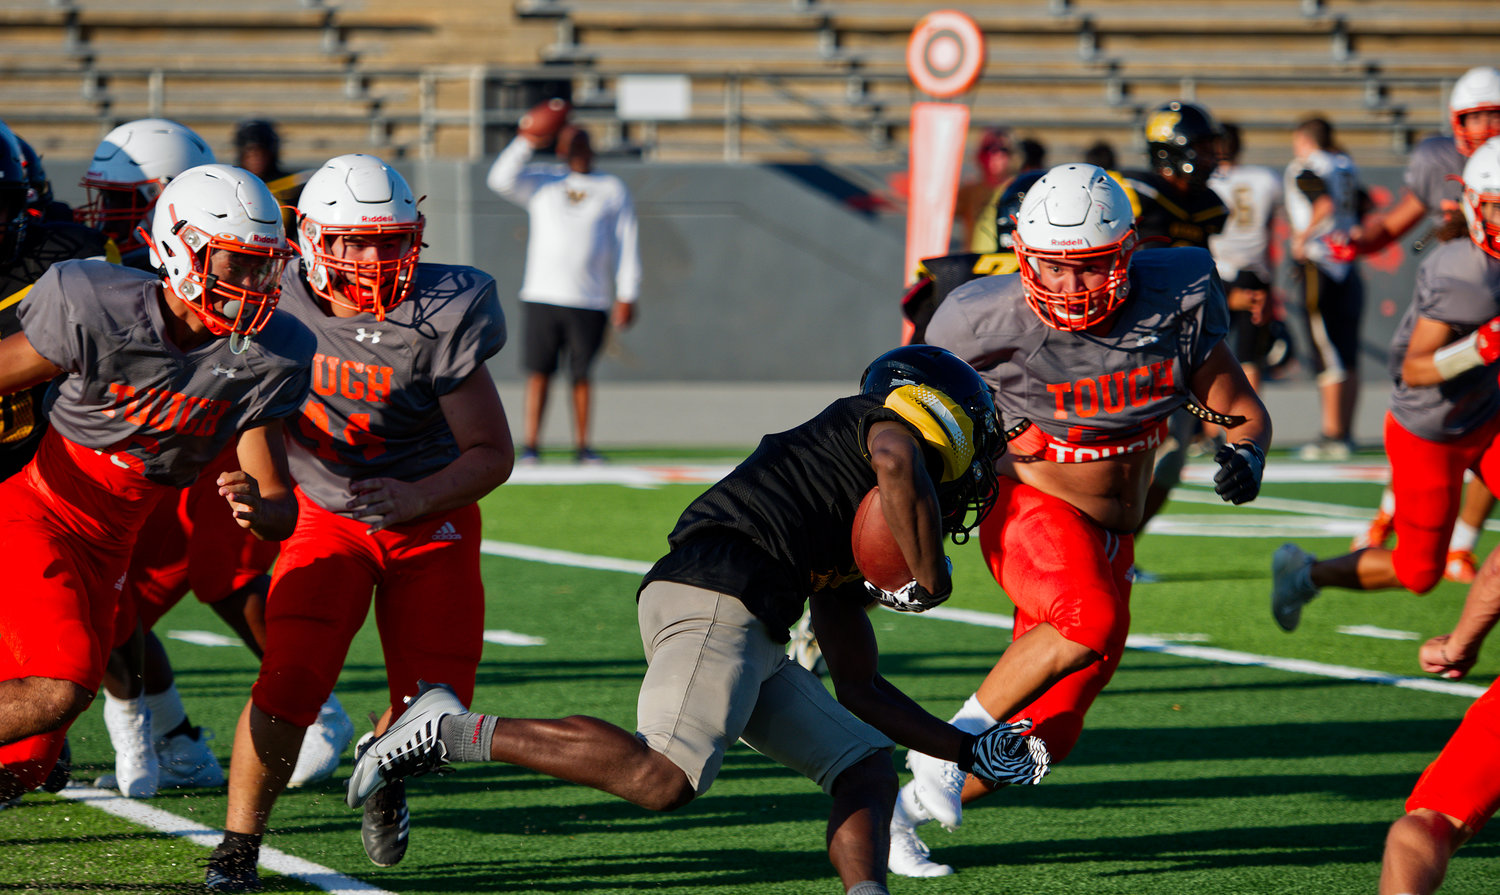 Mineola Yellowjacket defenders swarm to the Winona ball carrier during Friday’s first scrimmage of the 2022 high school football season.